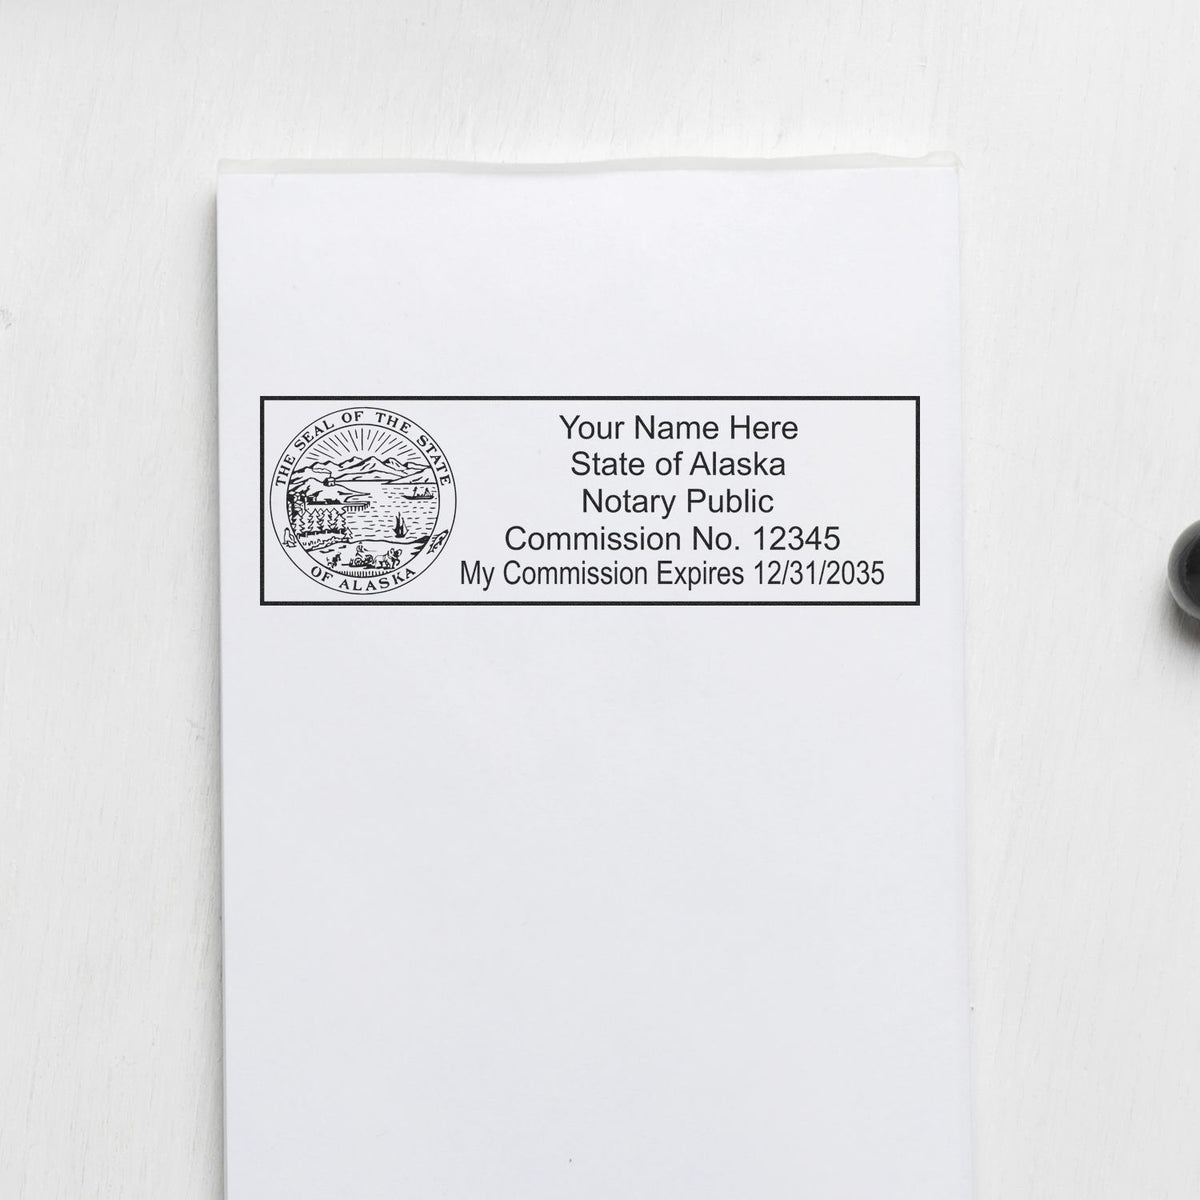 The Slim Pre-Inked State Seal Notary Stamp for Alaska stamp impression comes to life with a crisp, detailed photo on paper - showcasing true professional quality.